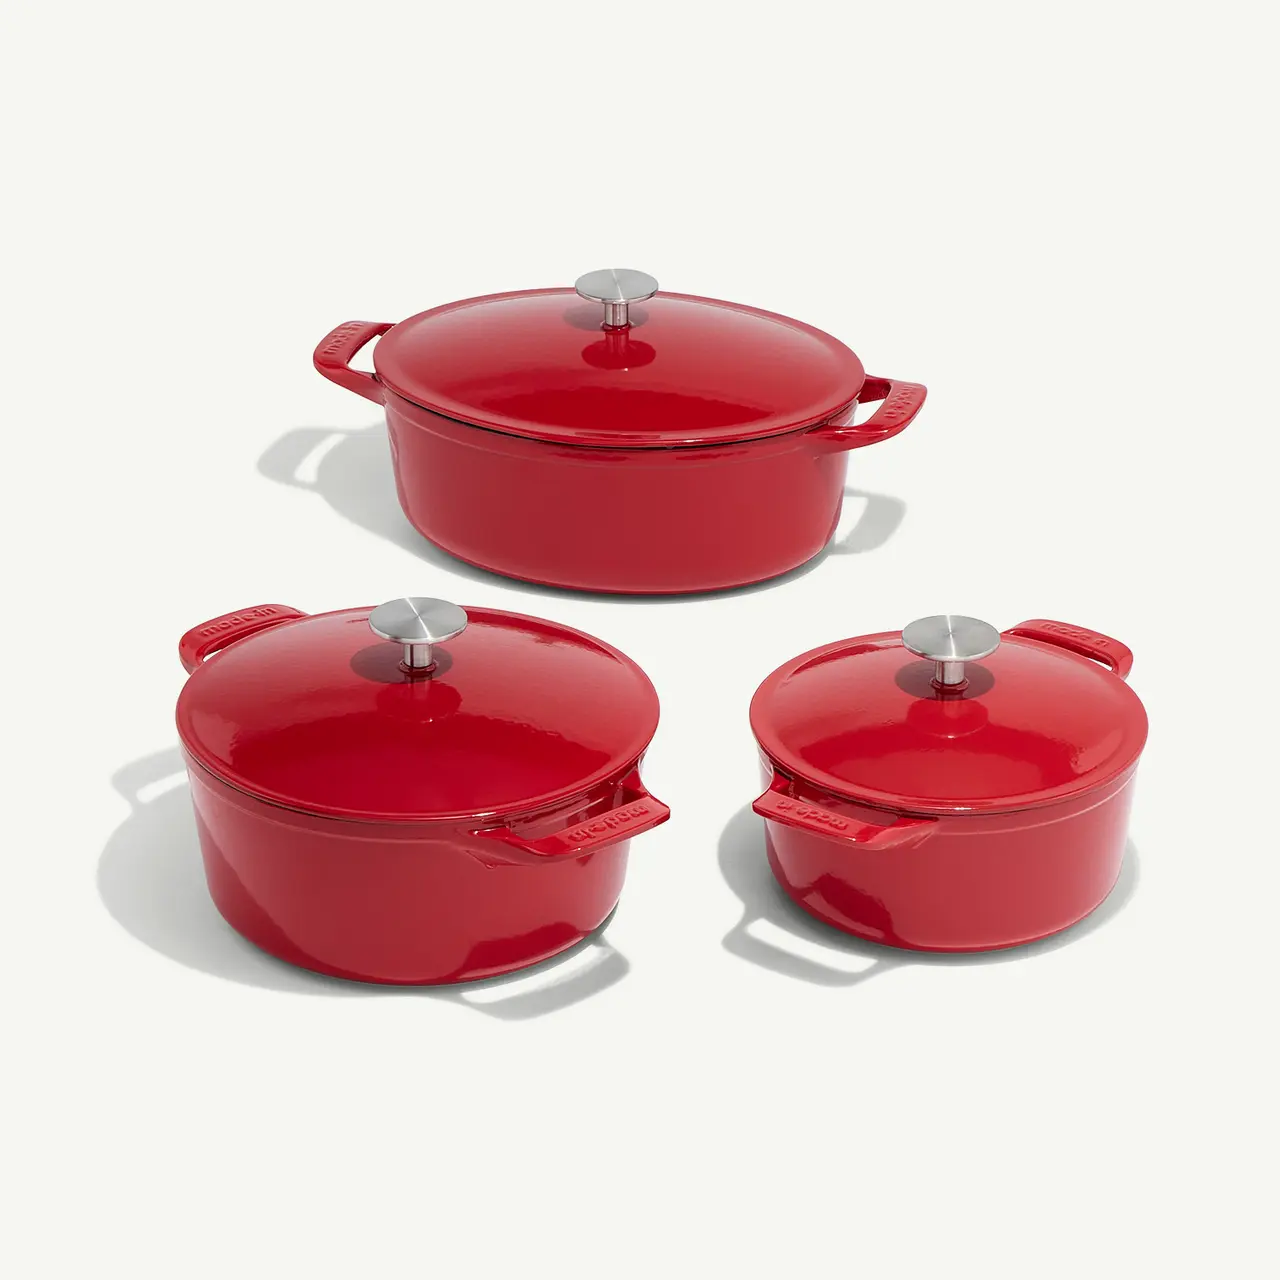 Three red Dutch ovens with silver knobs on the lids are arranged on a light background.